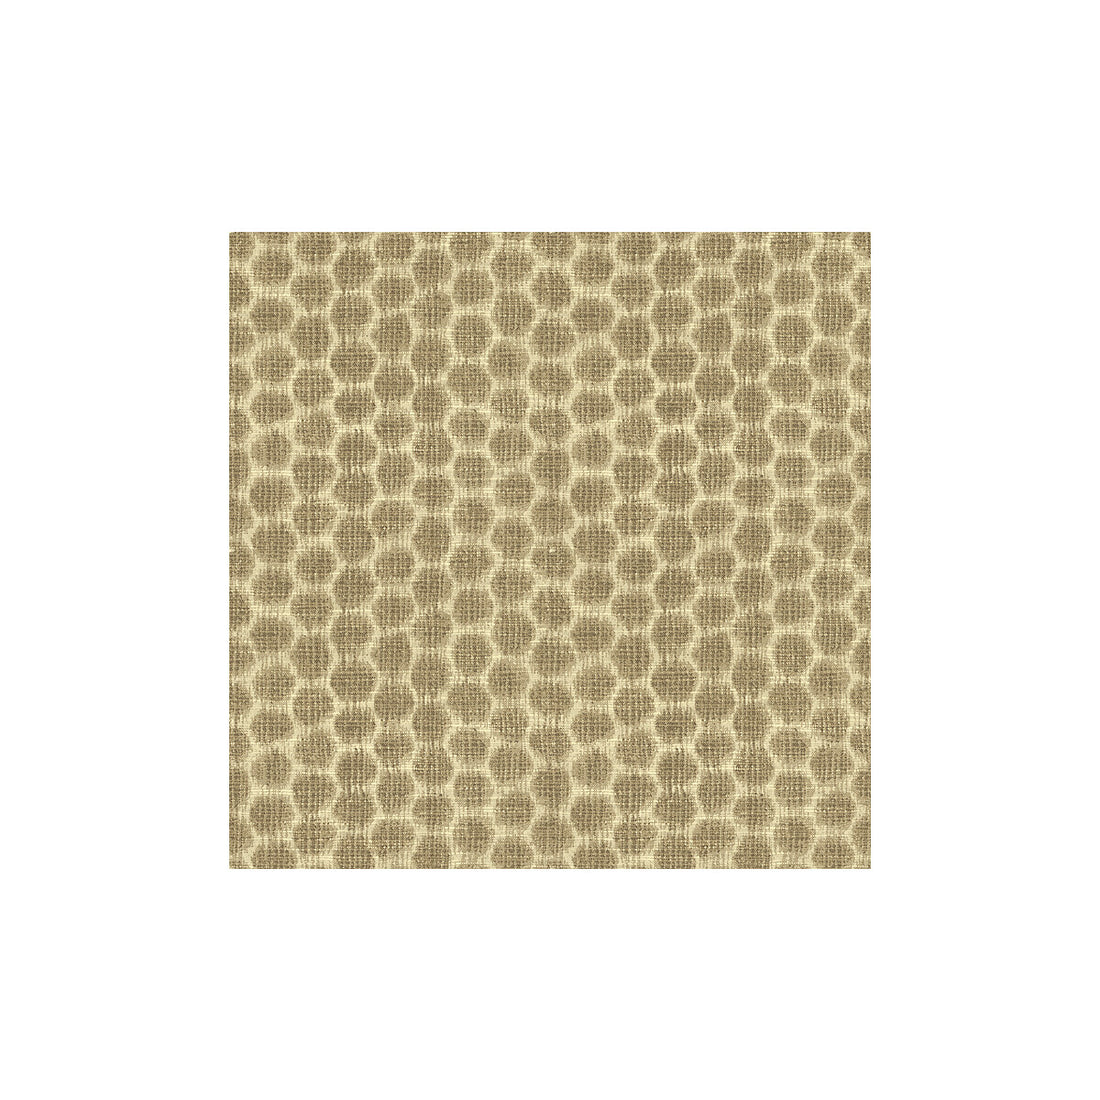 Kravet Design fabric in 33132-11 color - pattern 33132.11.0 - by Kravet Design in the Echo Heirloom India collection